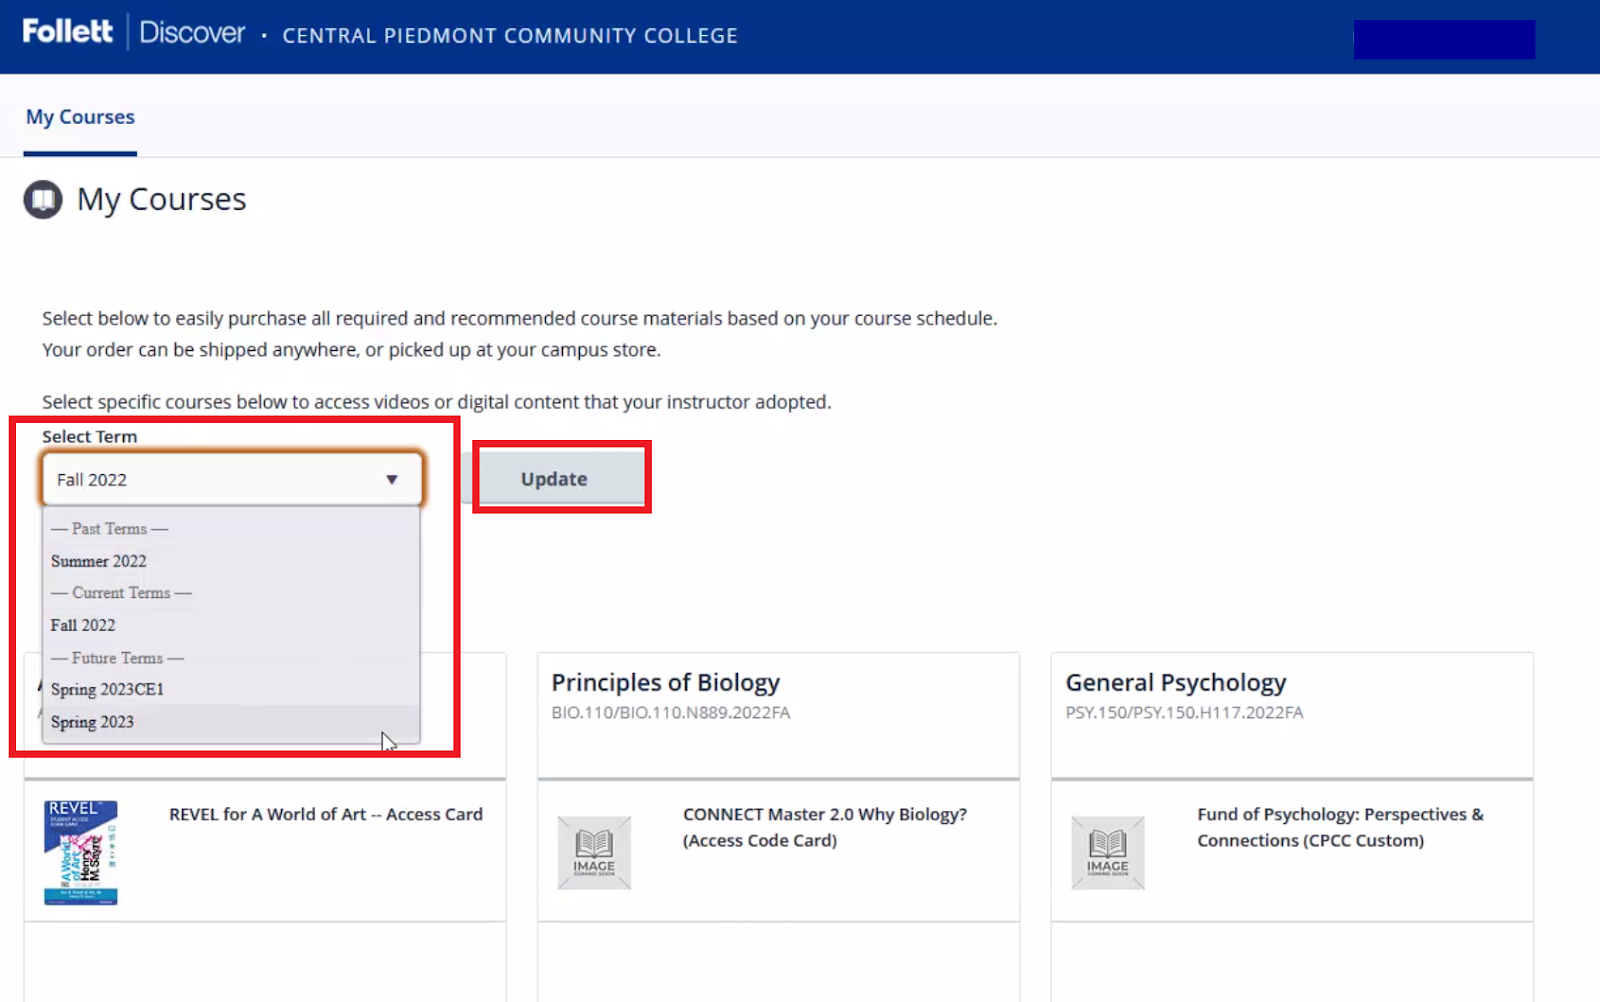 The "My Courses" page of the Follett Discover bookstore website. The "Select Term" dropdown and the "Update" button are outlined in red for emphasis.